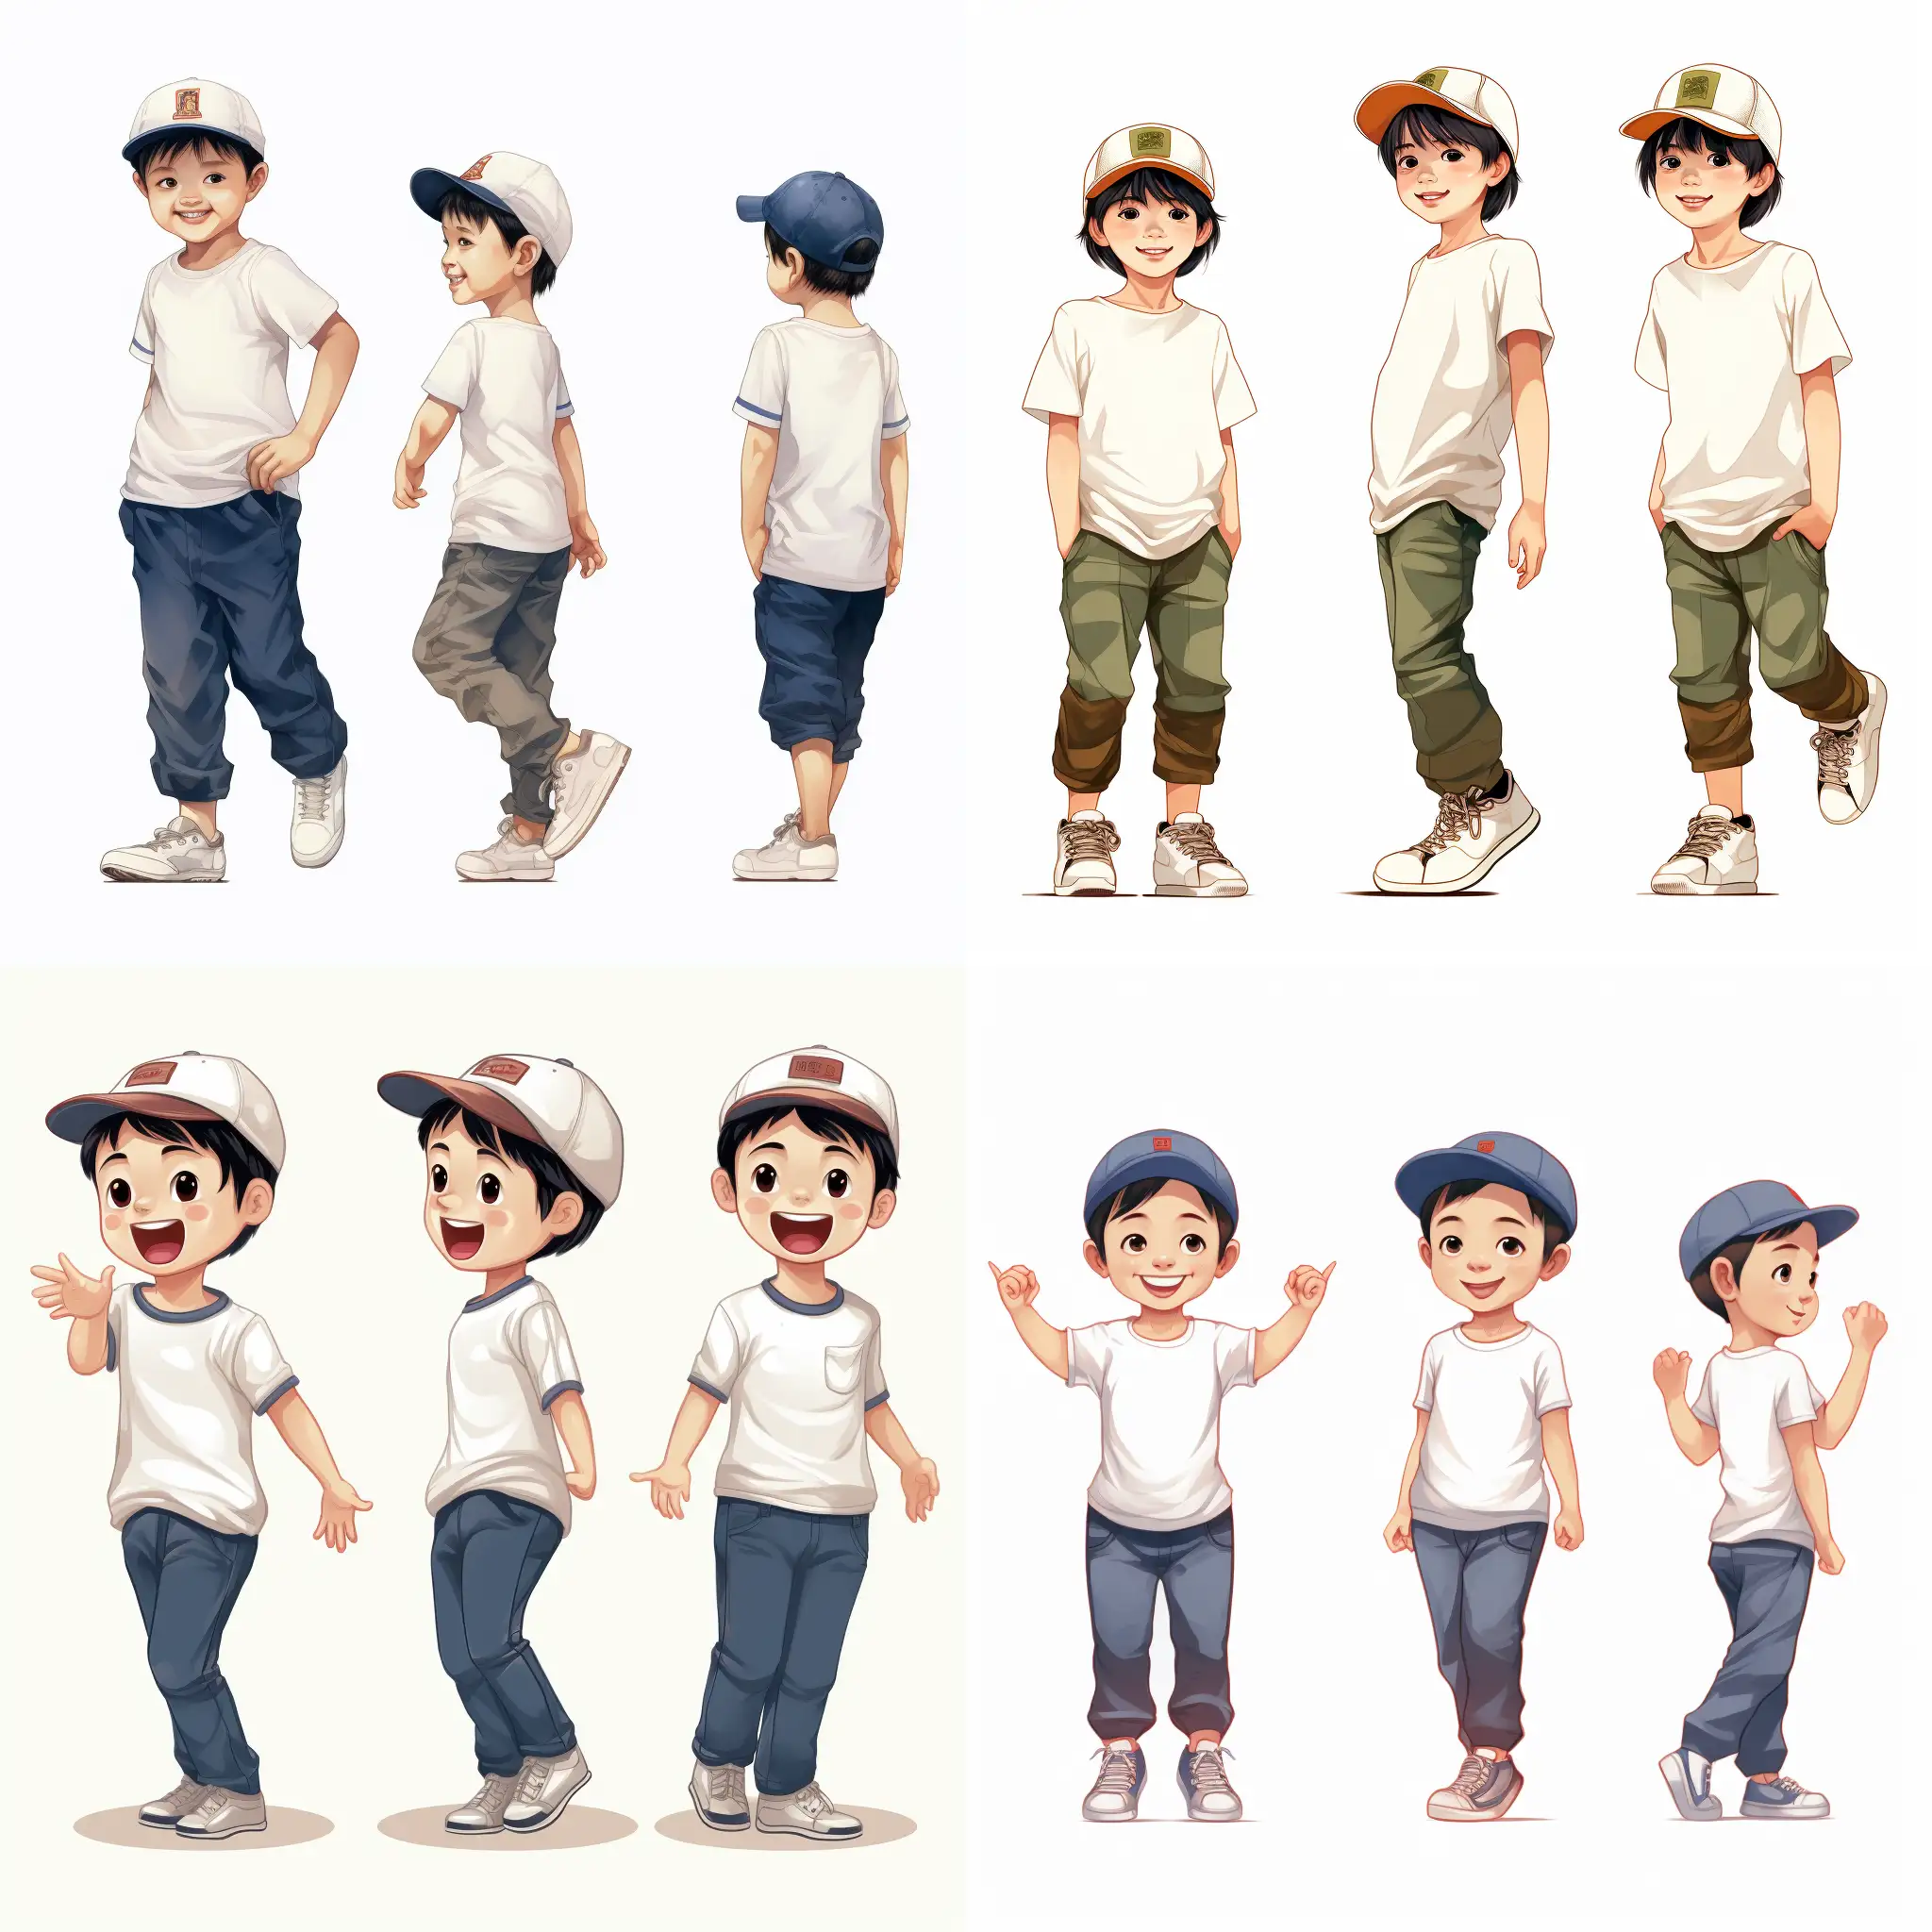 Main Design (主要設計) with a white background Illustrate 6 years old  Xiao Hong iMain Design (主要設計) with a white background 
Illustrate 6 years old  Xiao Ming in his everyday attire (colorful T-shirt, jeans, sneakers, and a cap) with a full-body view.
正面和背面視圖。
Expressions (表情):
Happy/smiling face (快樂/微笑的表情).
Curious/excited expression (好奇/興奮的表情).
Surprise/shock (驚訝/震驚的表情).
Concentrating/thinking (專注/思考的表情).
n her floral-patterned dress, matching shoes, and with a ribbon or flower accessory in her hair with a full-body view. 正面和背面視圖。 Expressions (表情): Sweet and warm smile (甜美而溫暖的微笑). Shy/blushing expression (害羞/臉紅的表情). Excitement/happiness (興奮/快樂的表情). Thoughtful/reflective look (沉思/深思的神情)